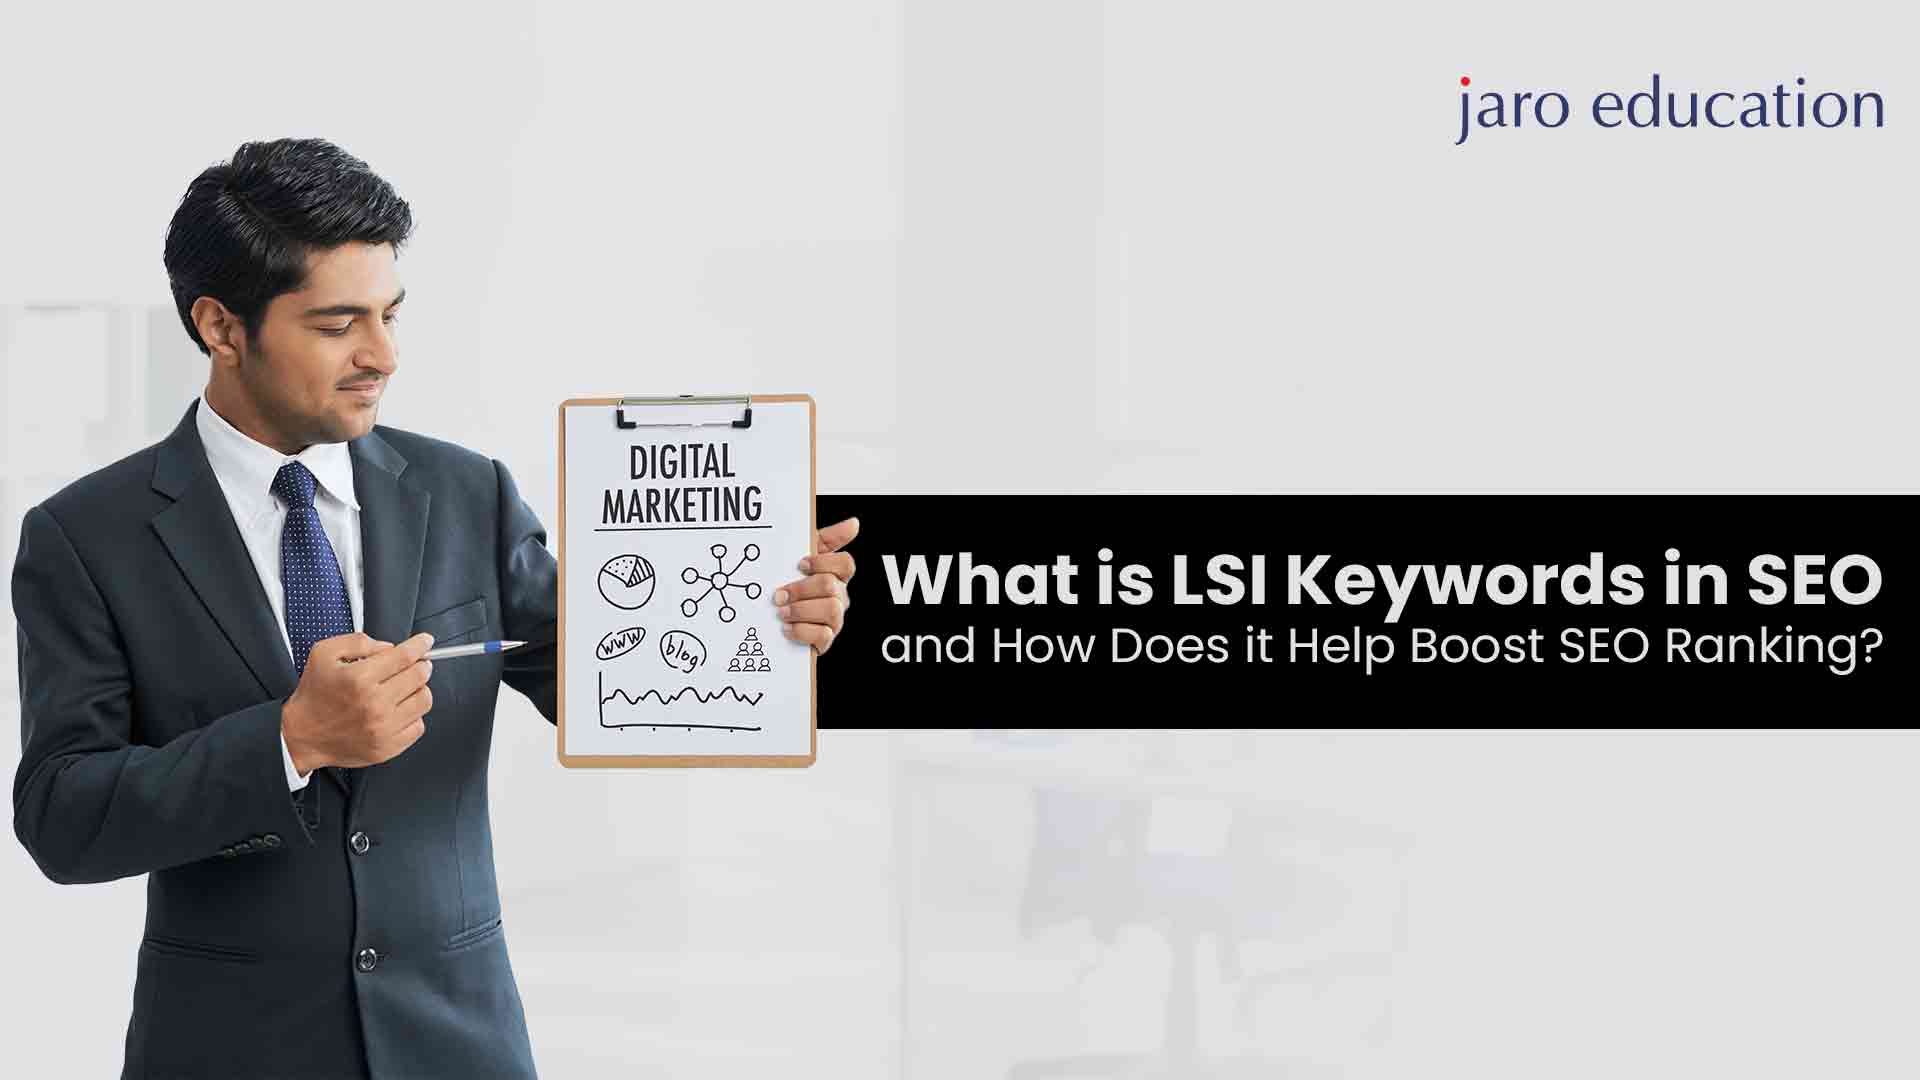 What is LSI Keywords in SEO and How Does it Help Boost SEO Ranking